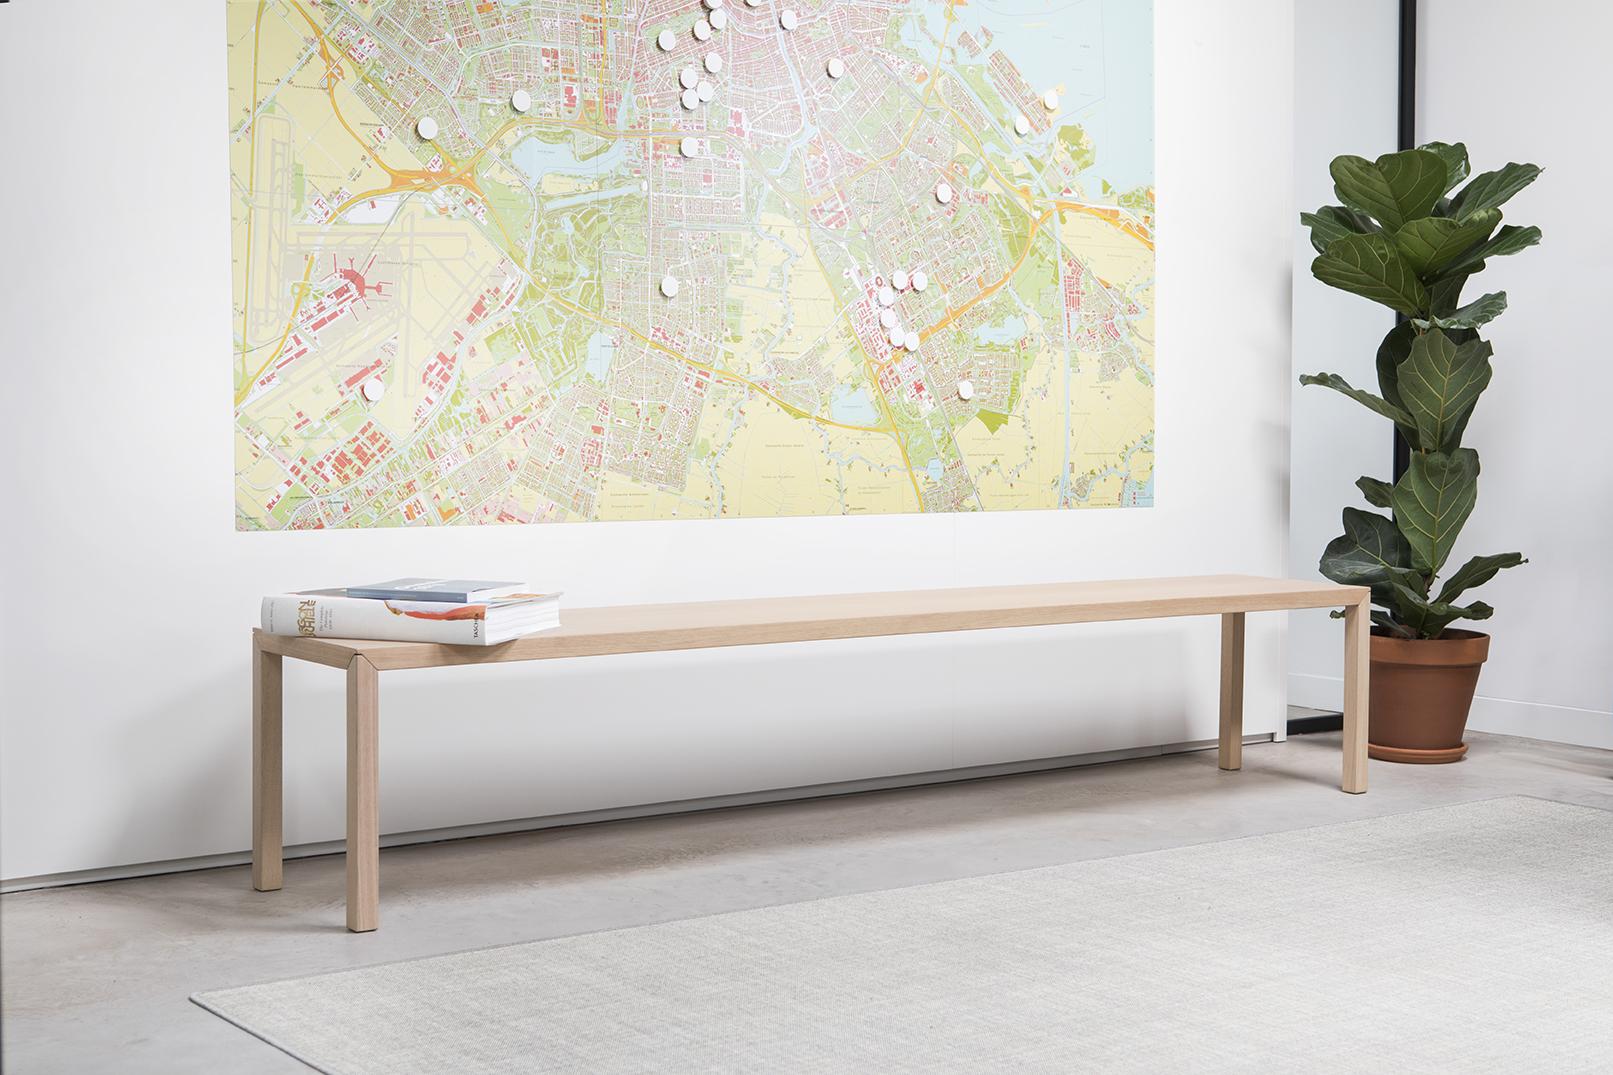 The corners of the Slim table have been further developed. The new construction allowed us to produce a Slim bench too: a bench to complement the Slim and the Slim+. It is also available with a matching cushion in fabric or leather.
Price listed for